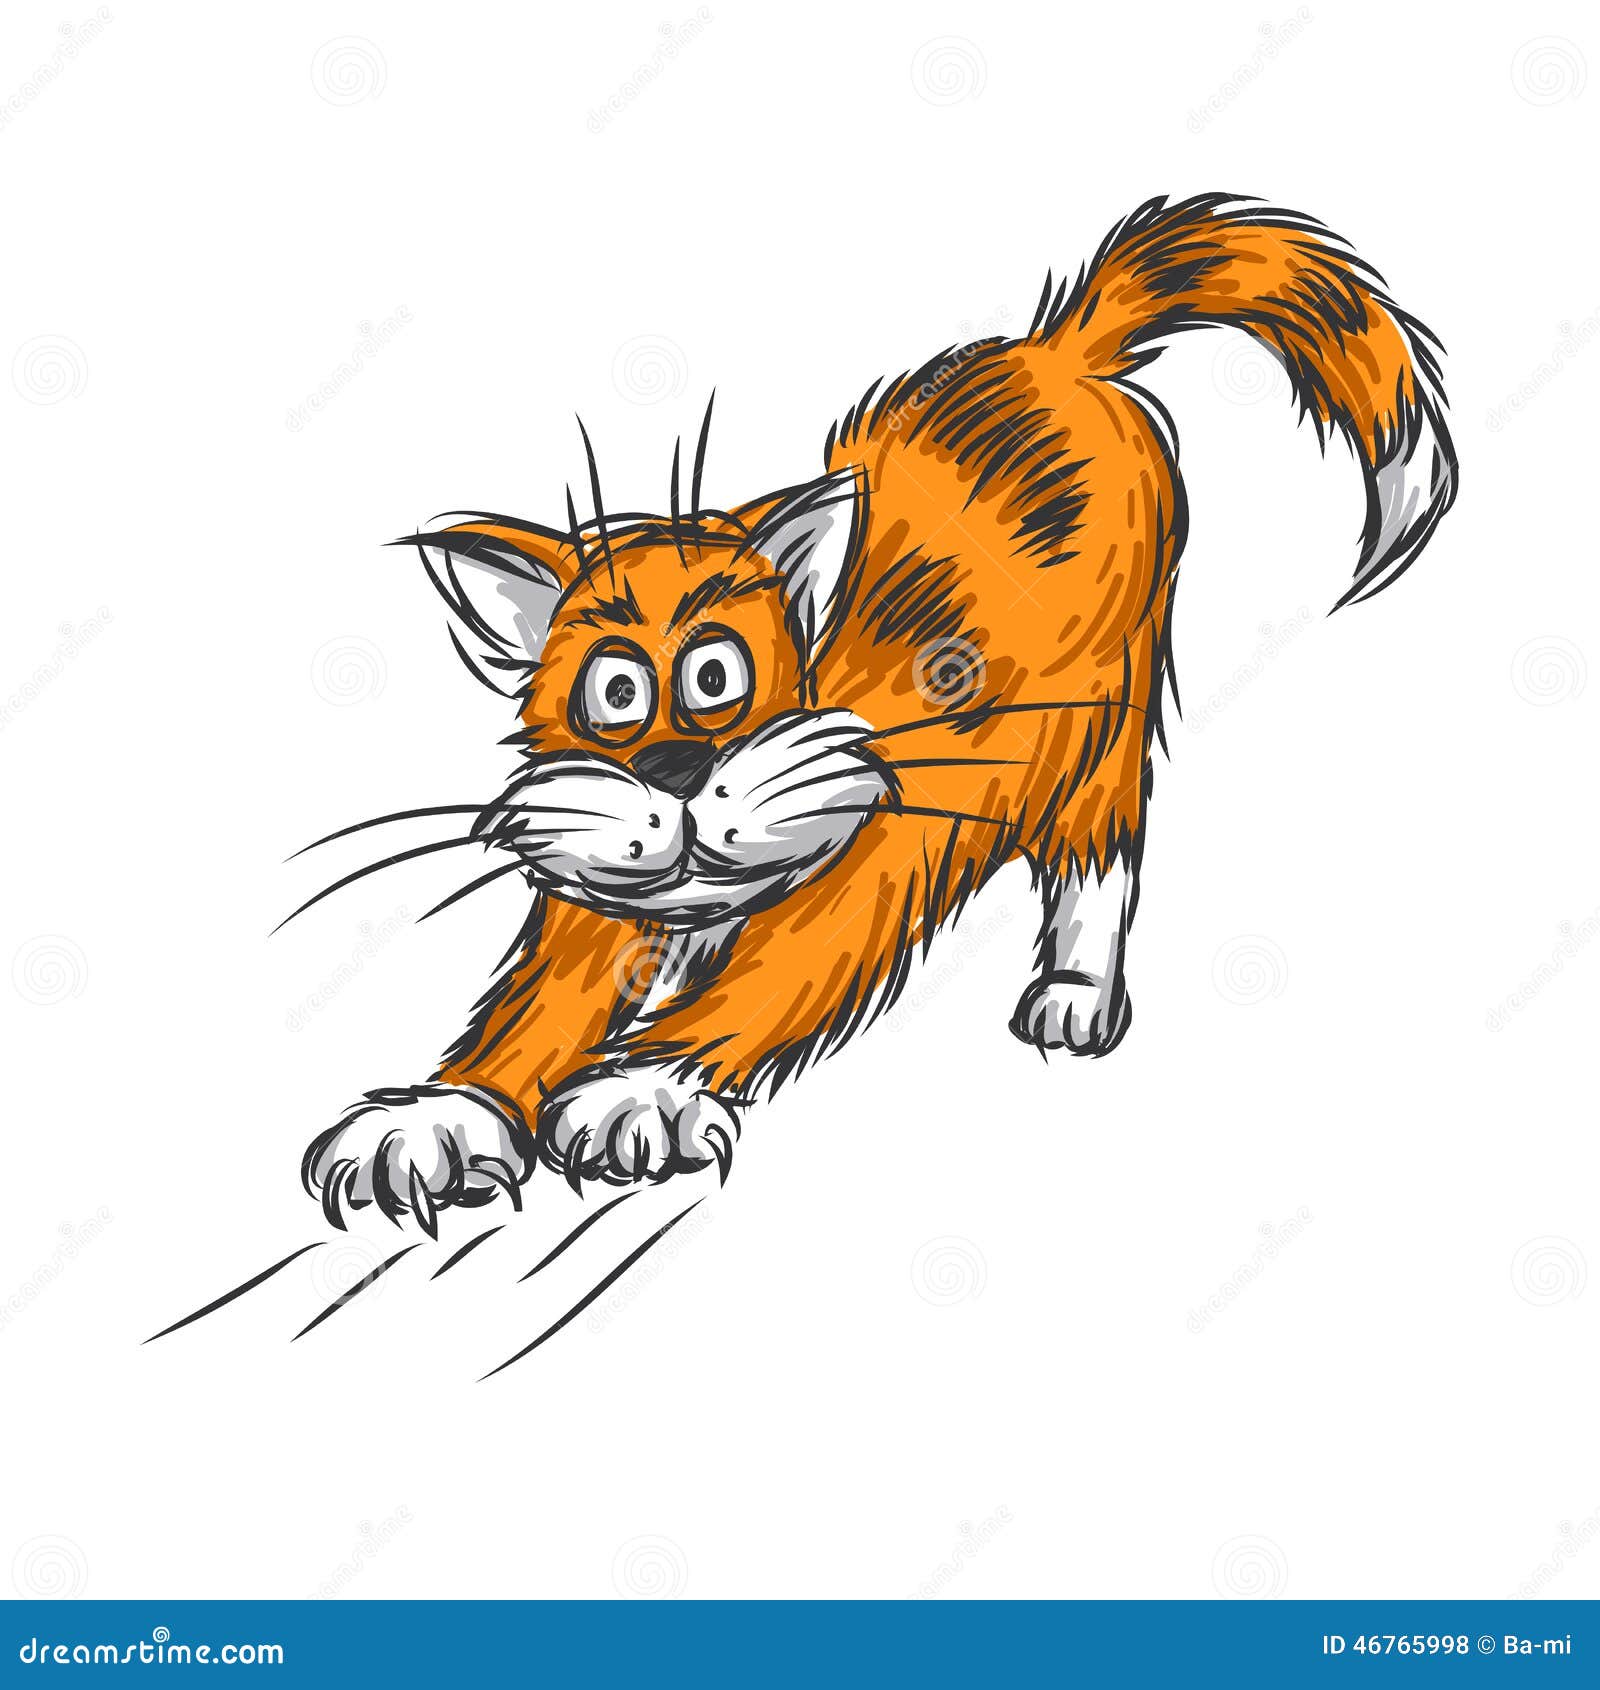 Ginger Cat Stock Vector - Image: 46765998